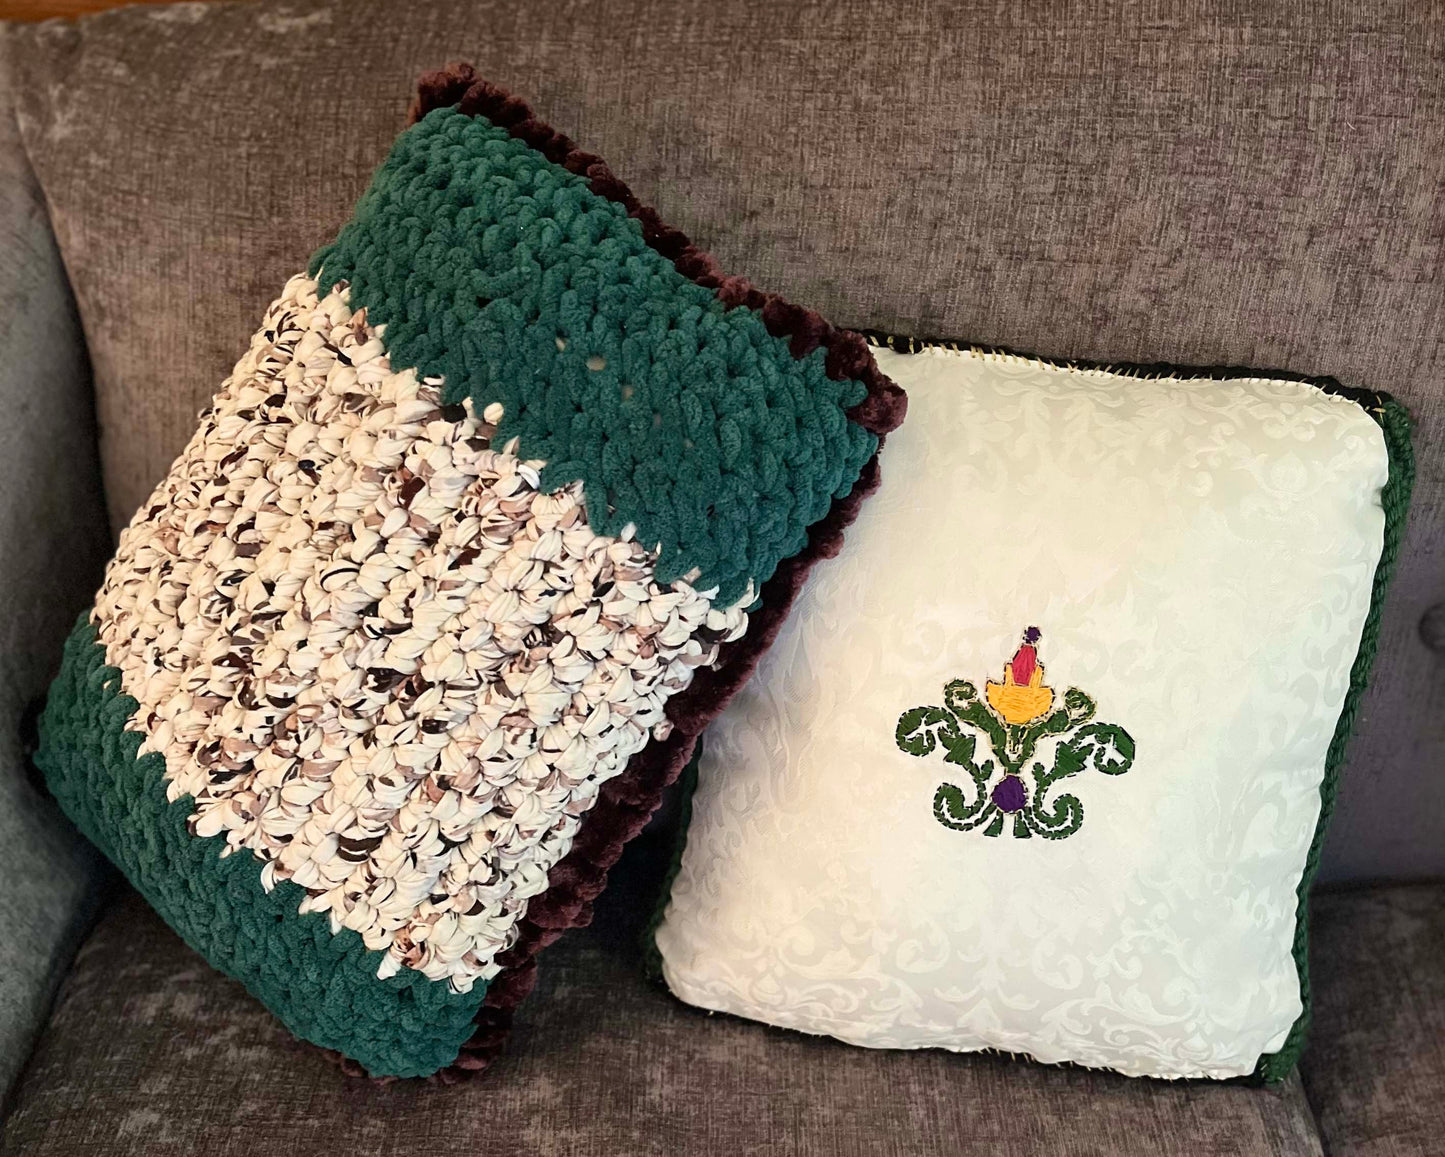 "Choose Your Own Adventure!" Handmade Fabric and Yarn Crochet/Knit Decorative Statement Throw pillow